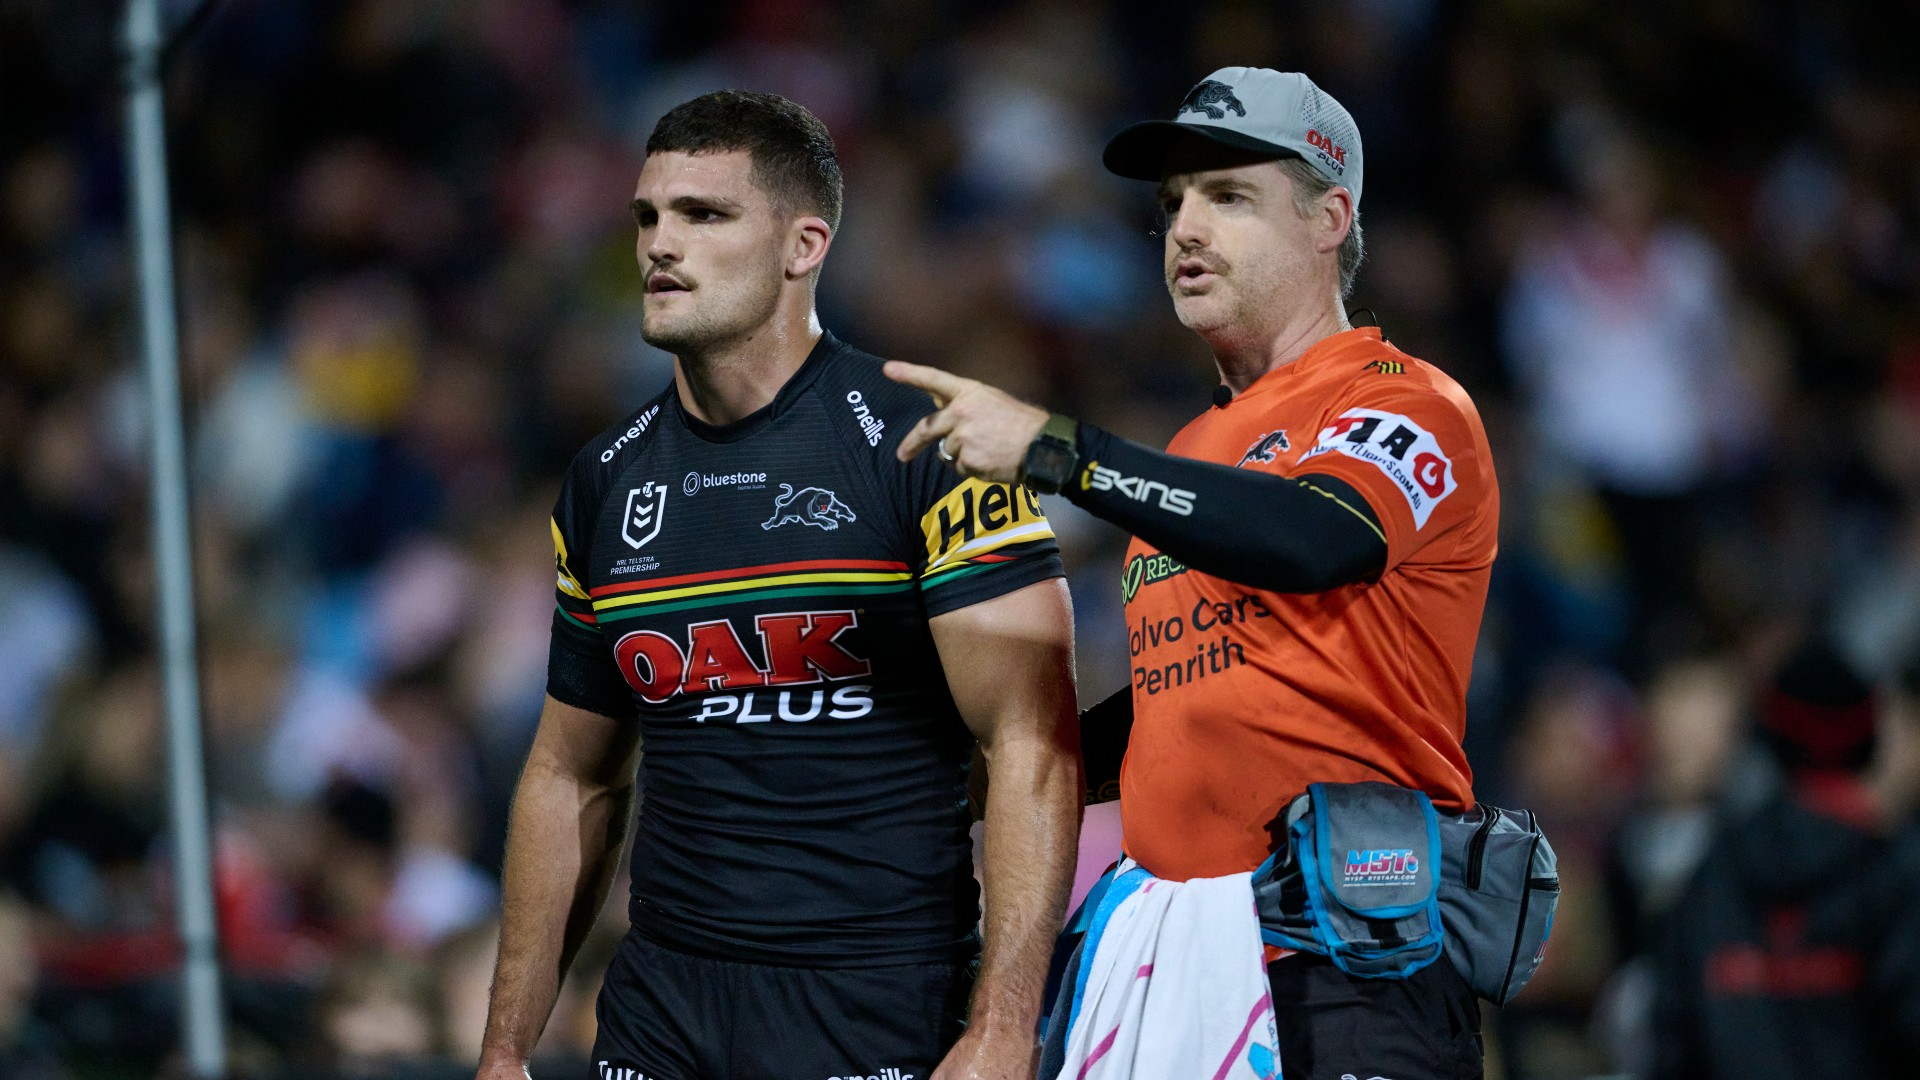 Ruled out: Cleary “touch and go” to play Origin again this year